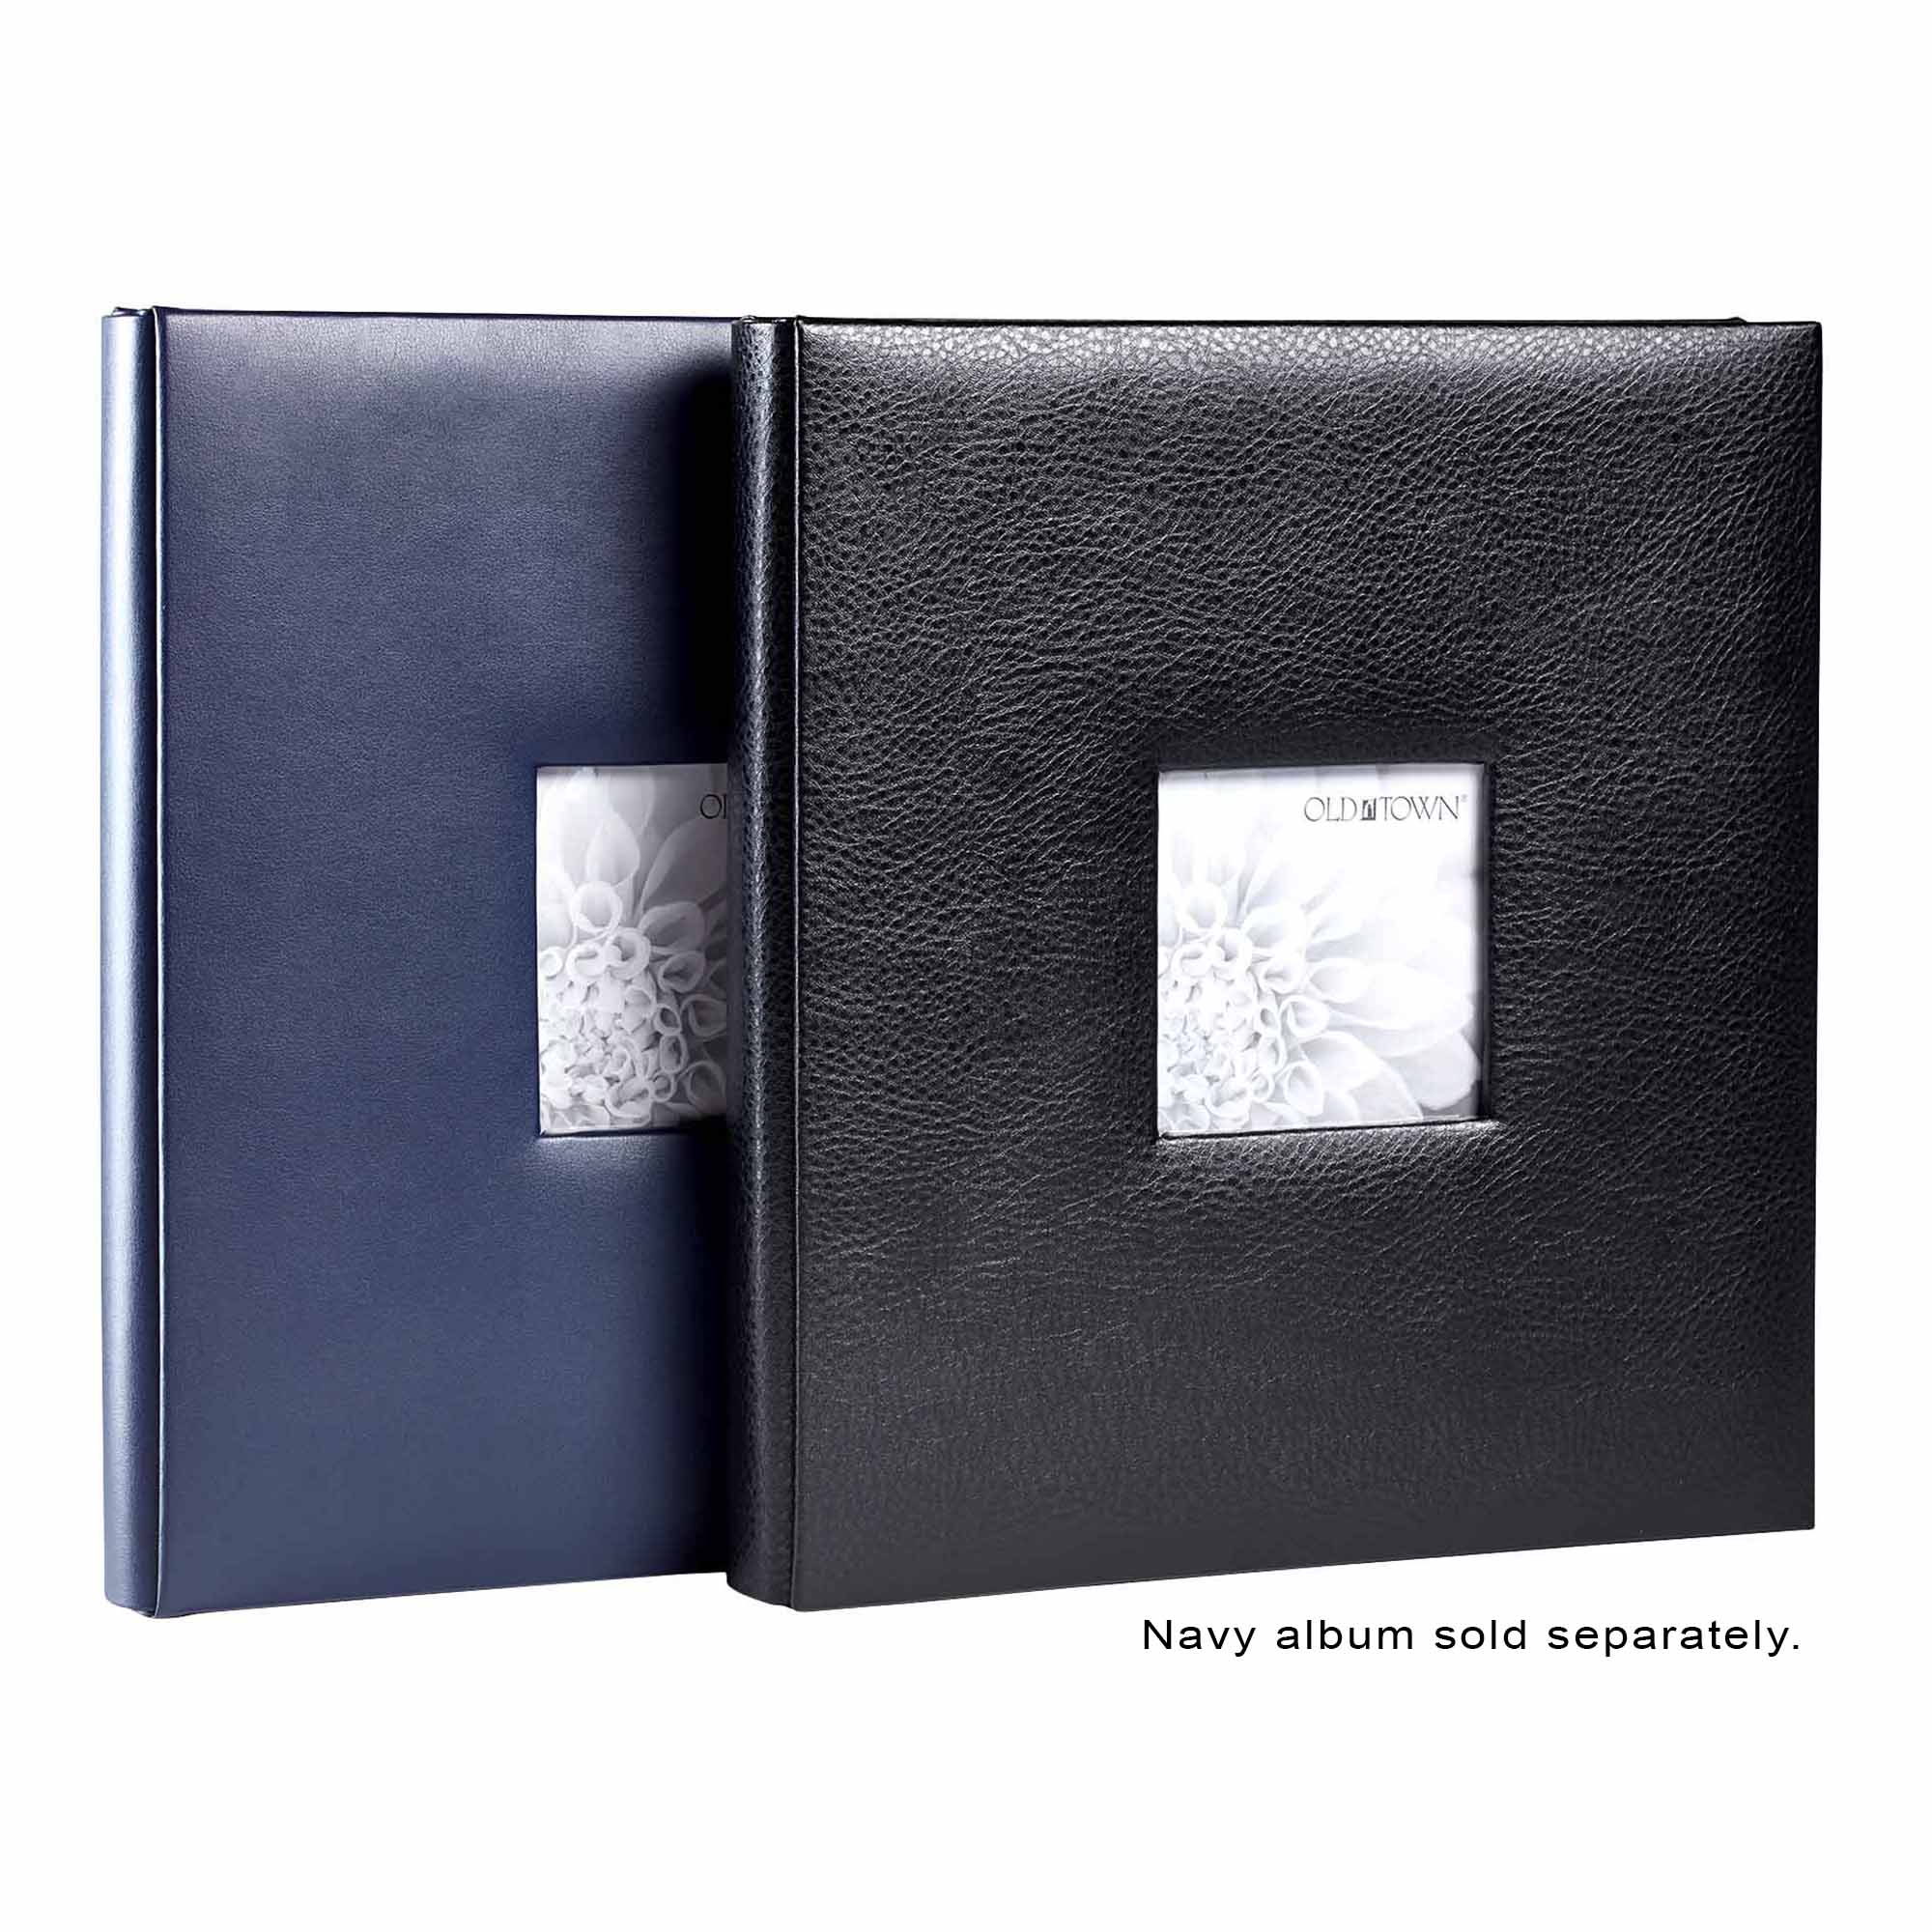 Small Photo Album 4x4 Hold 64 Photo - 2 Pack, Fabric Linen Cover 4x4 Black